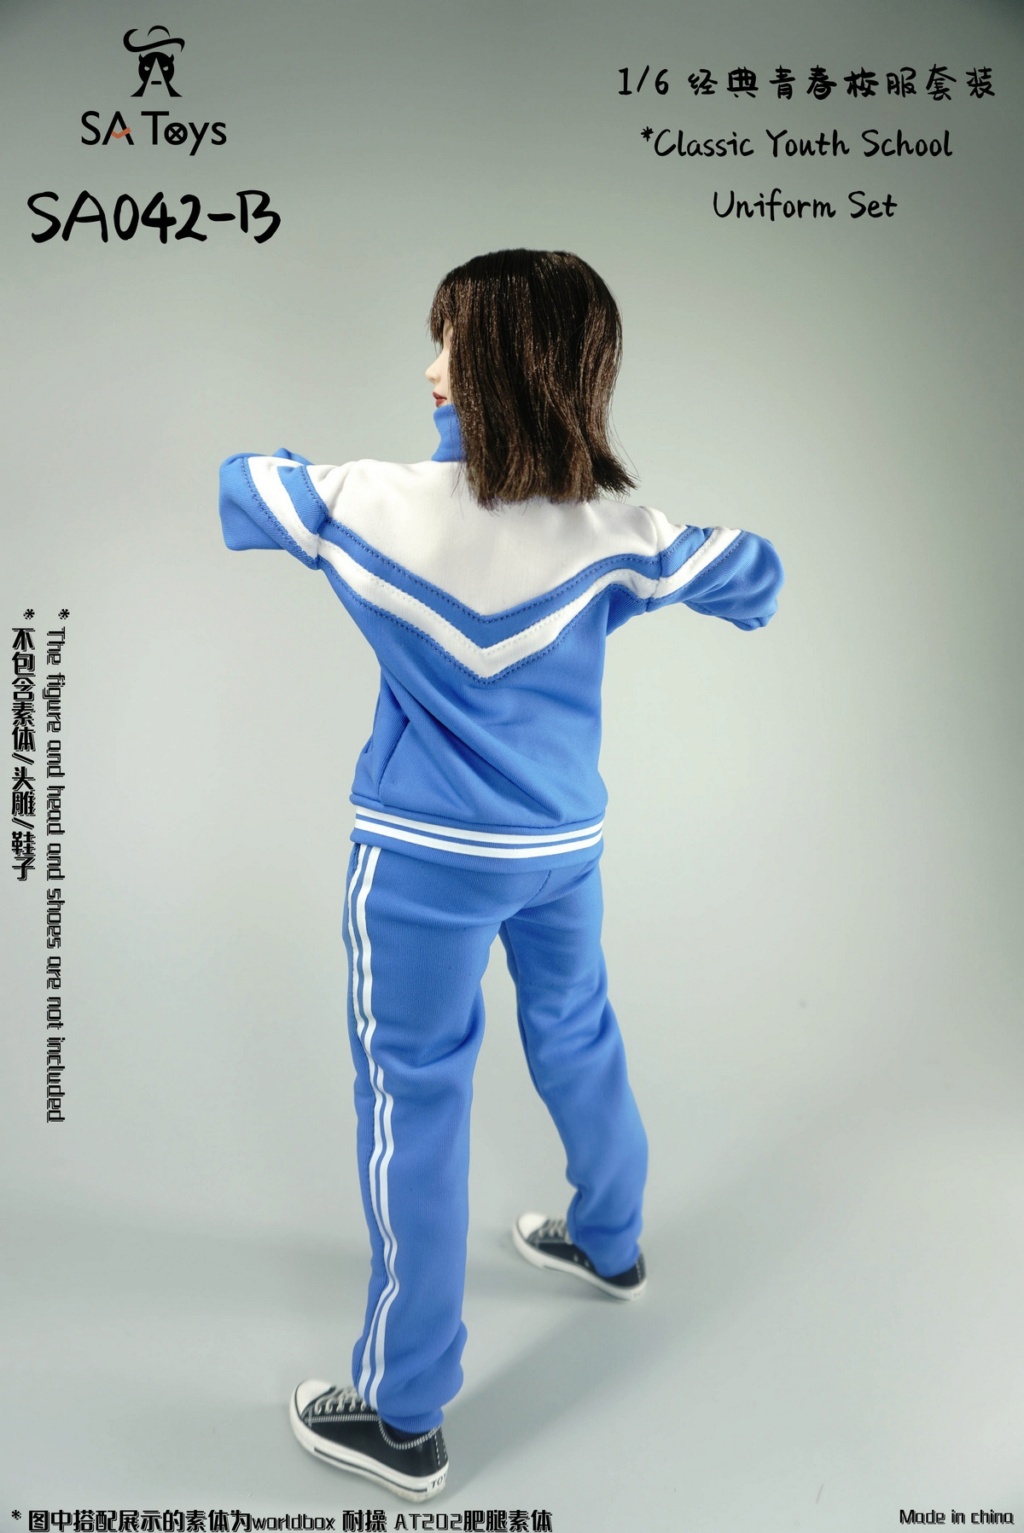 newproduct - NEW PRODUCT: SA Toys: 1/6 Classic Youth School Clothing （SA042 A/B） 12183810